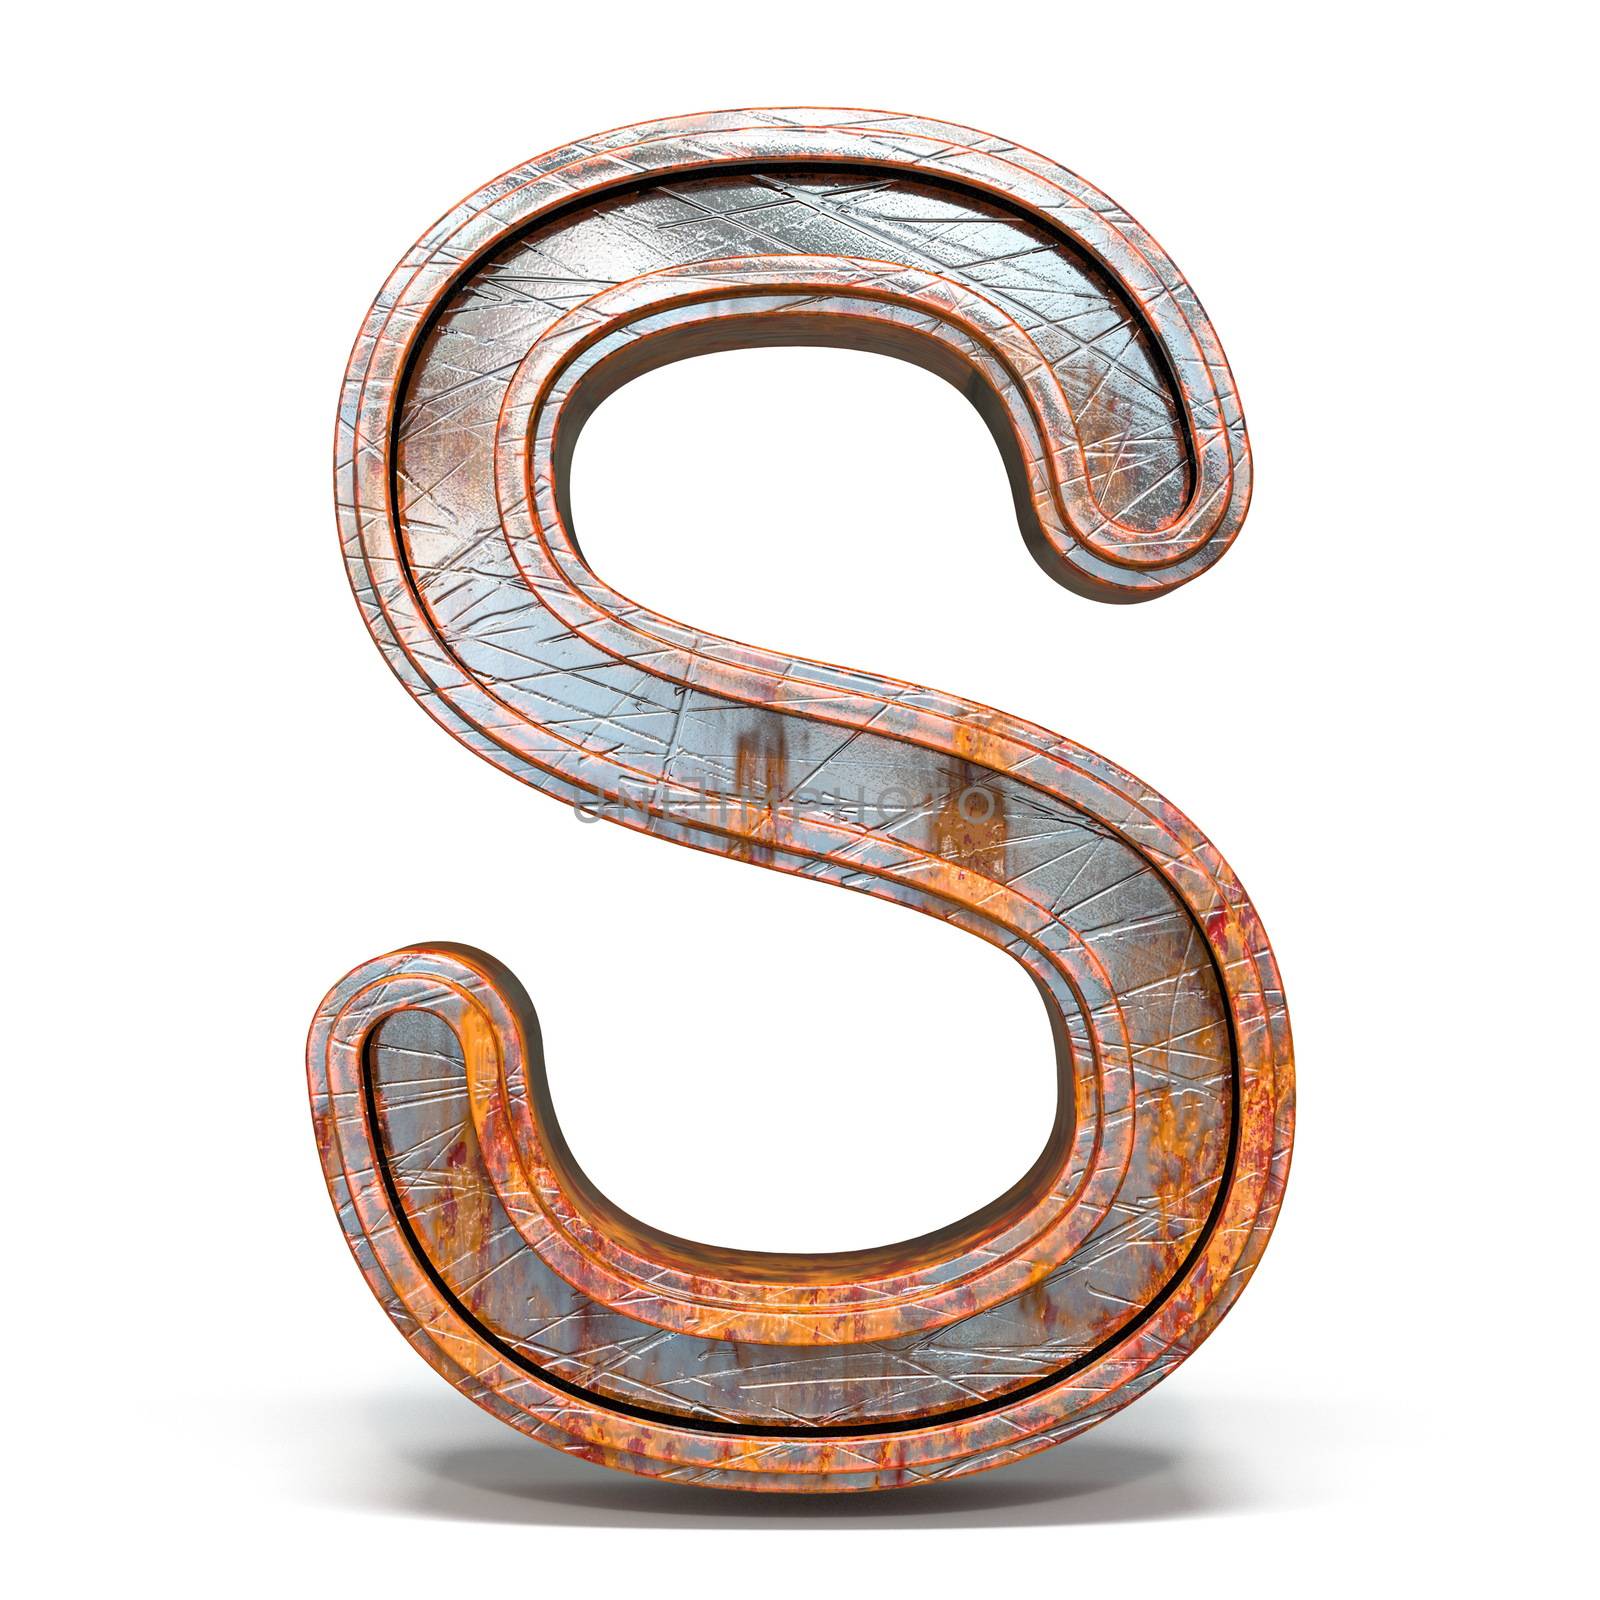 Rusty metal font Letter S 3D render illustration isolated on white background